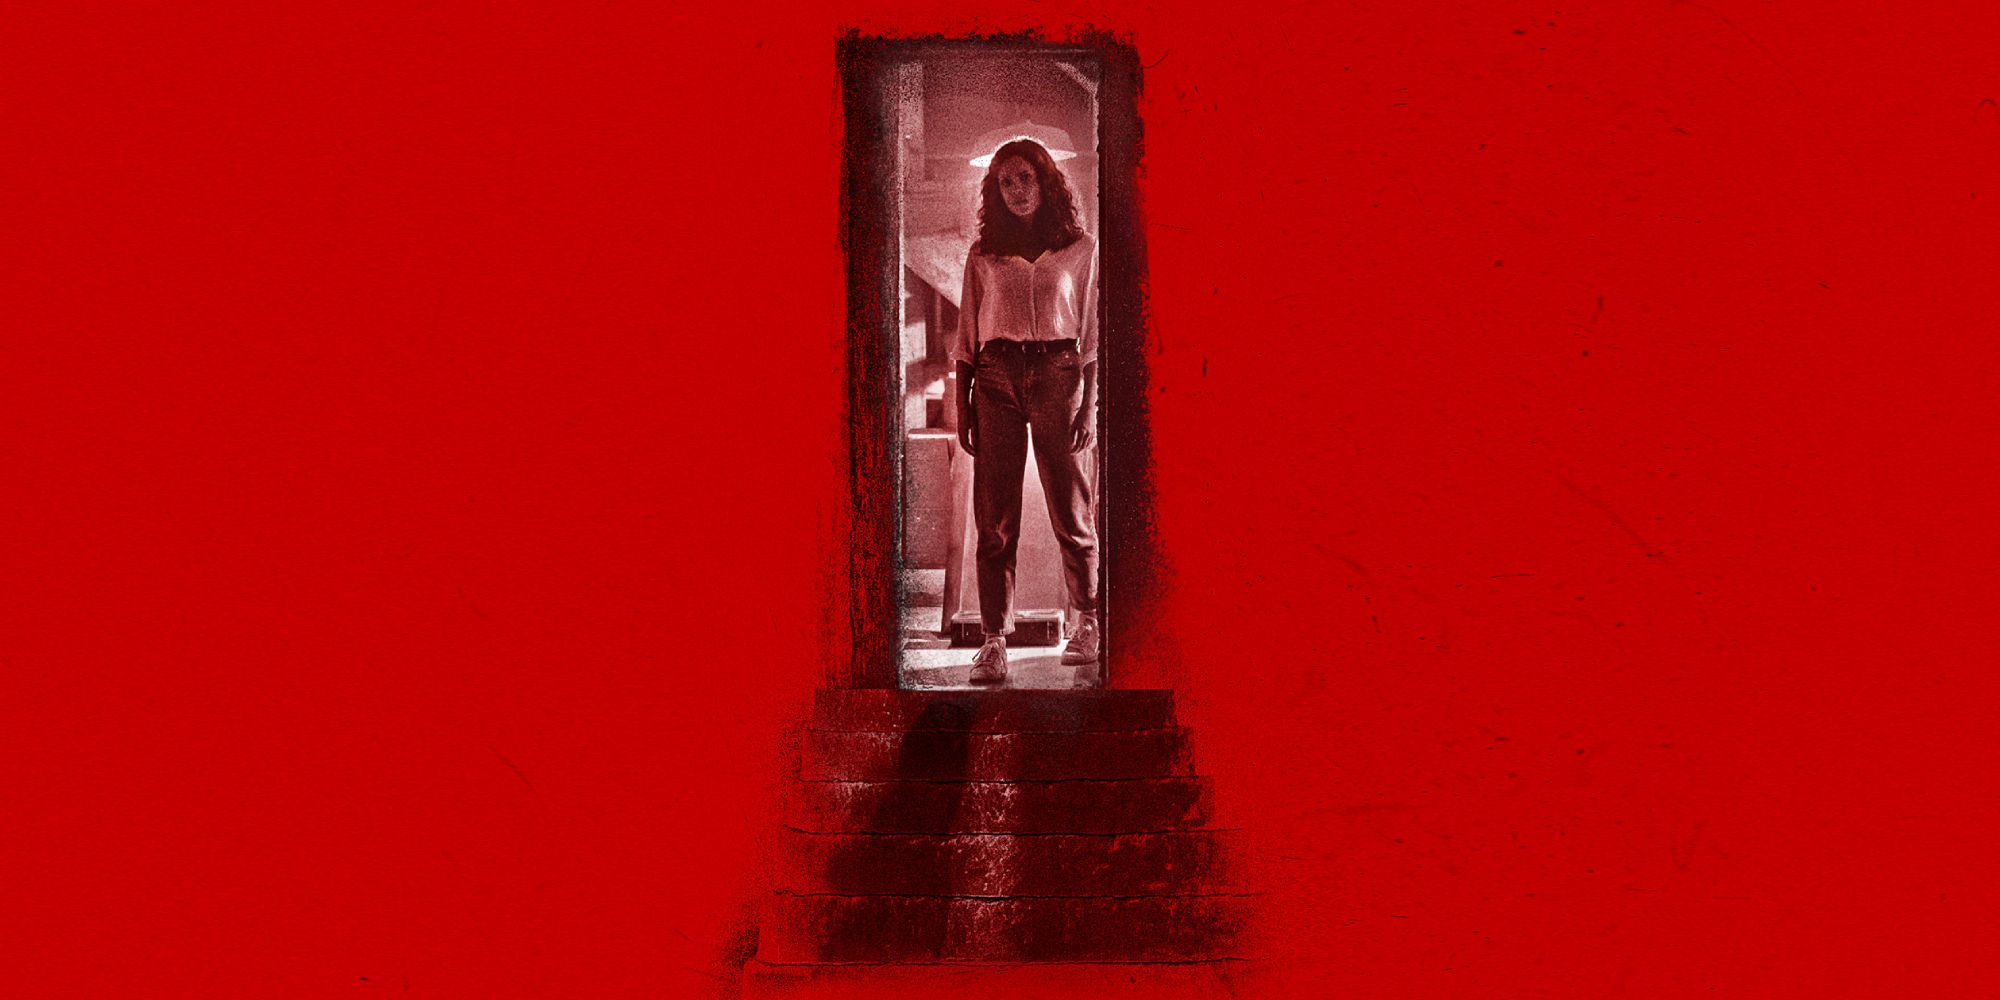 Poster of Barbarian released in 2022 with Tess standing behind red background